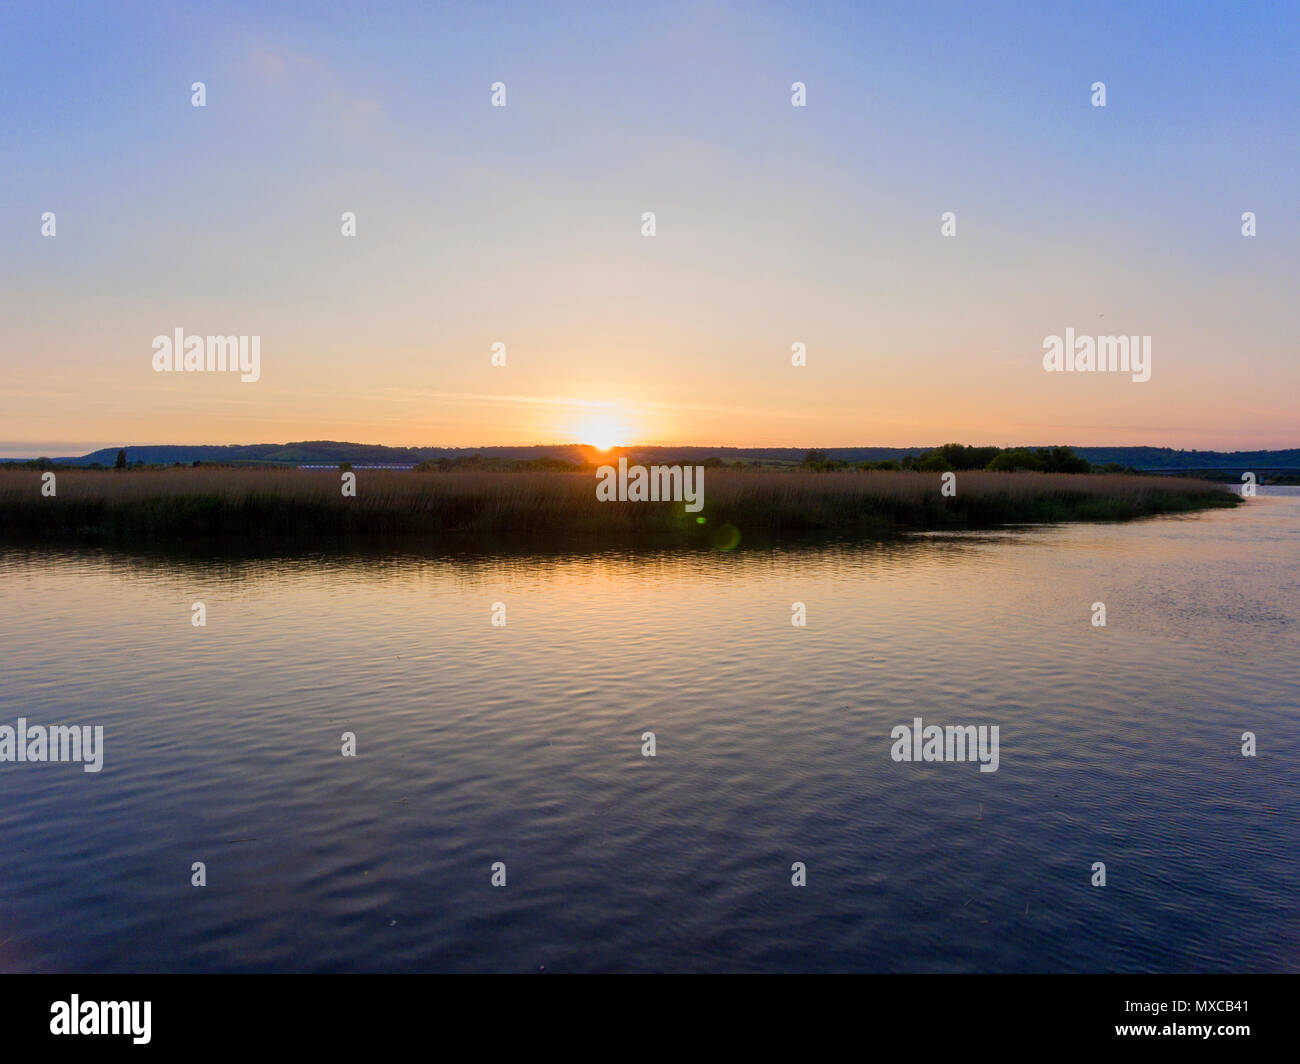 Sunset reflected over the River Medway and reed beds, Kent, UK Stock Photo